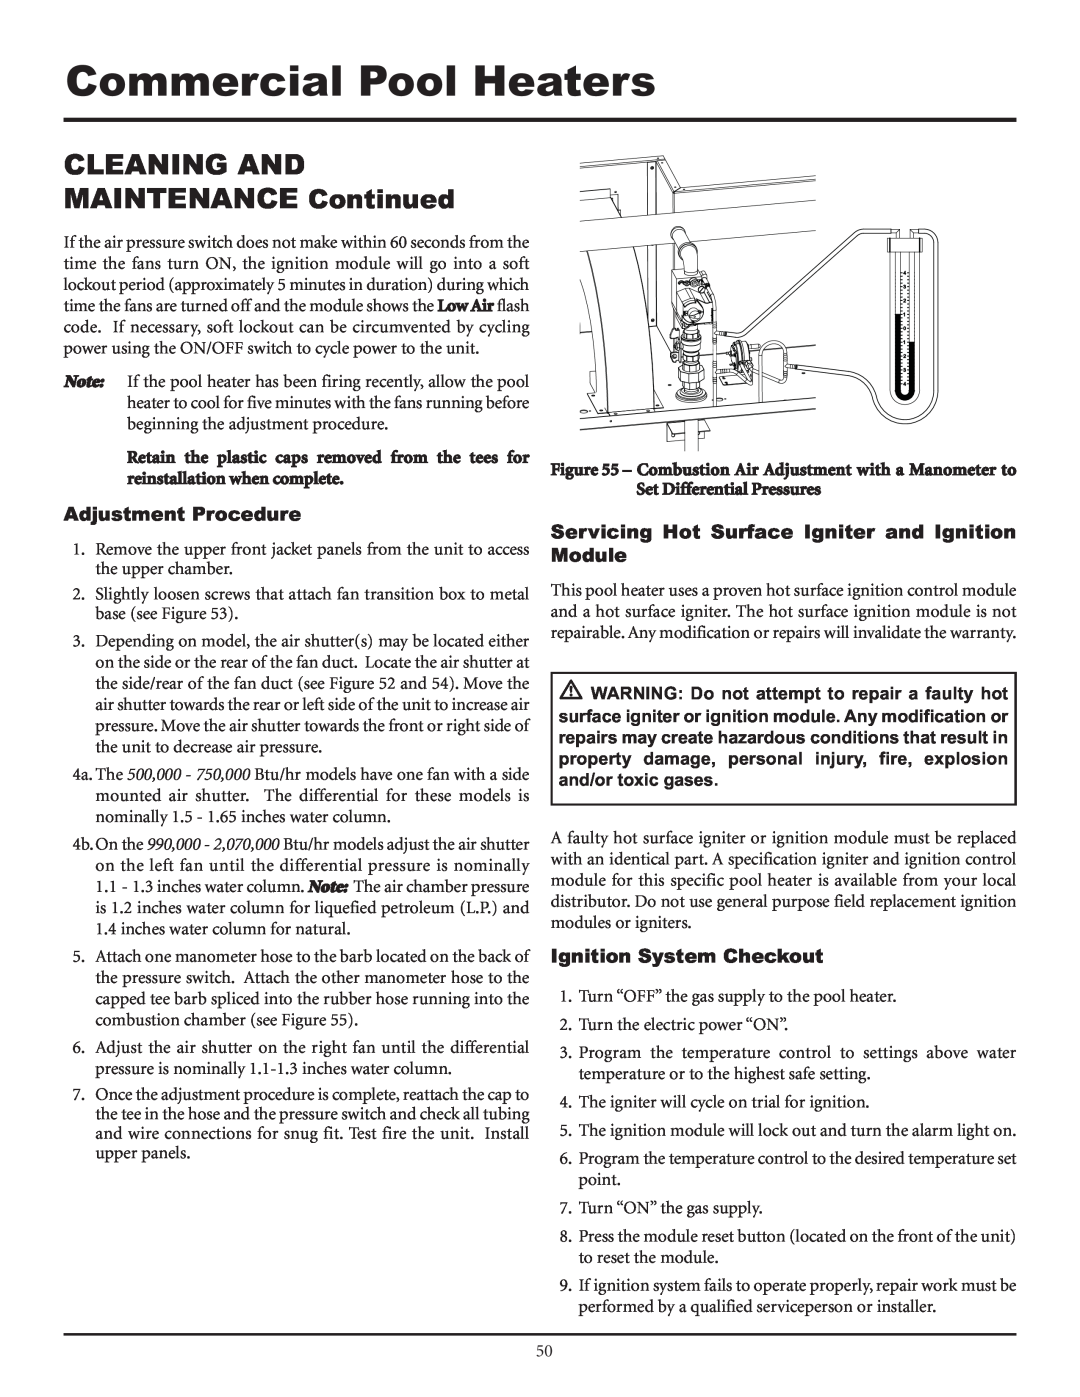 Lochinvar F0600187510 Adjustment Procedure, Servicing Hot Surface Igniter and Ignition Module, Ignition System Checkout 